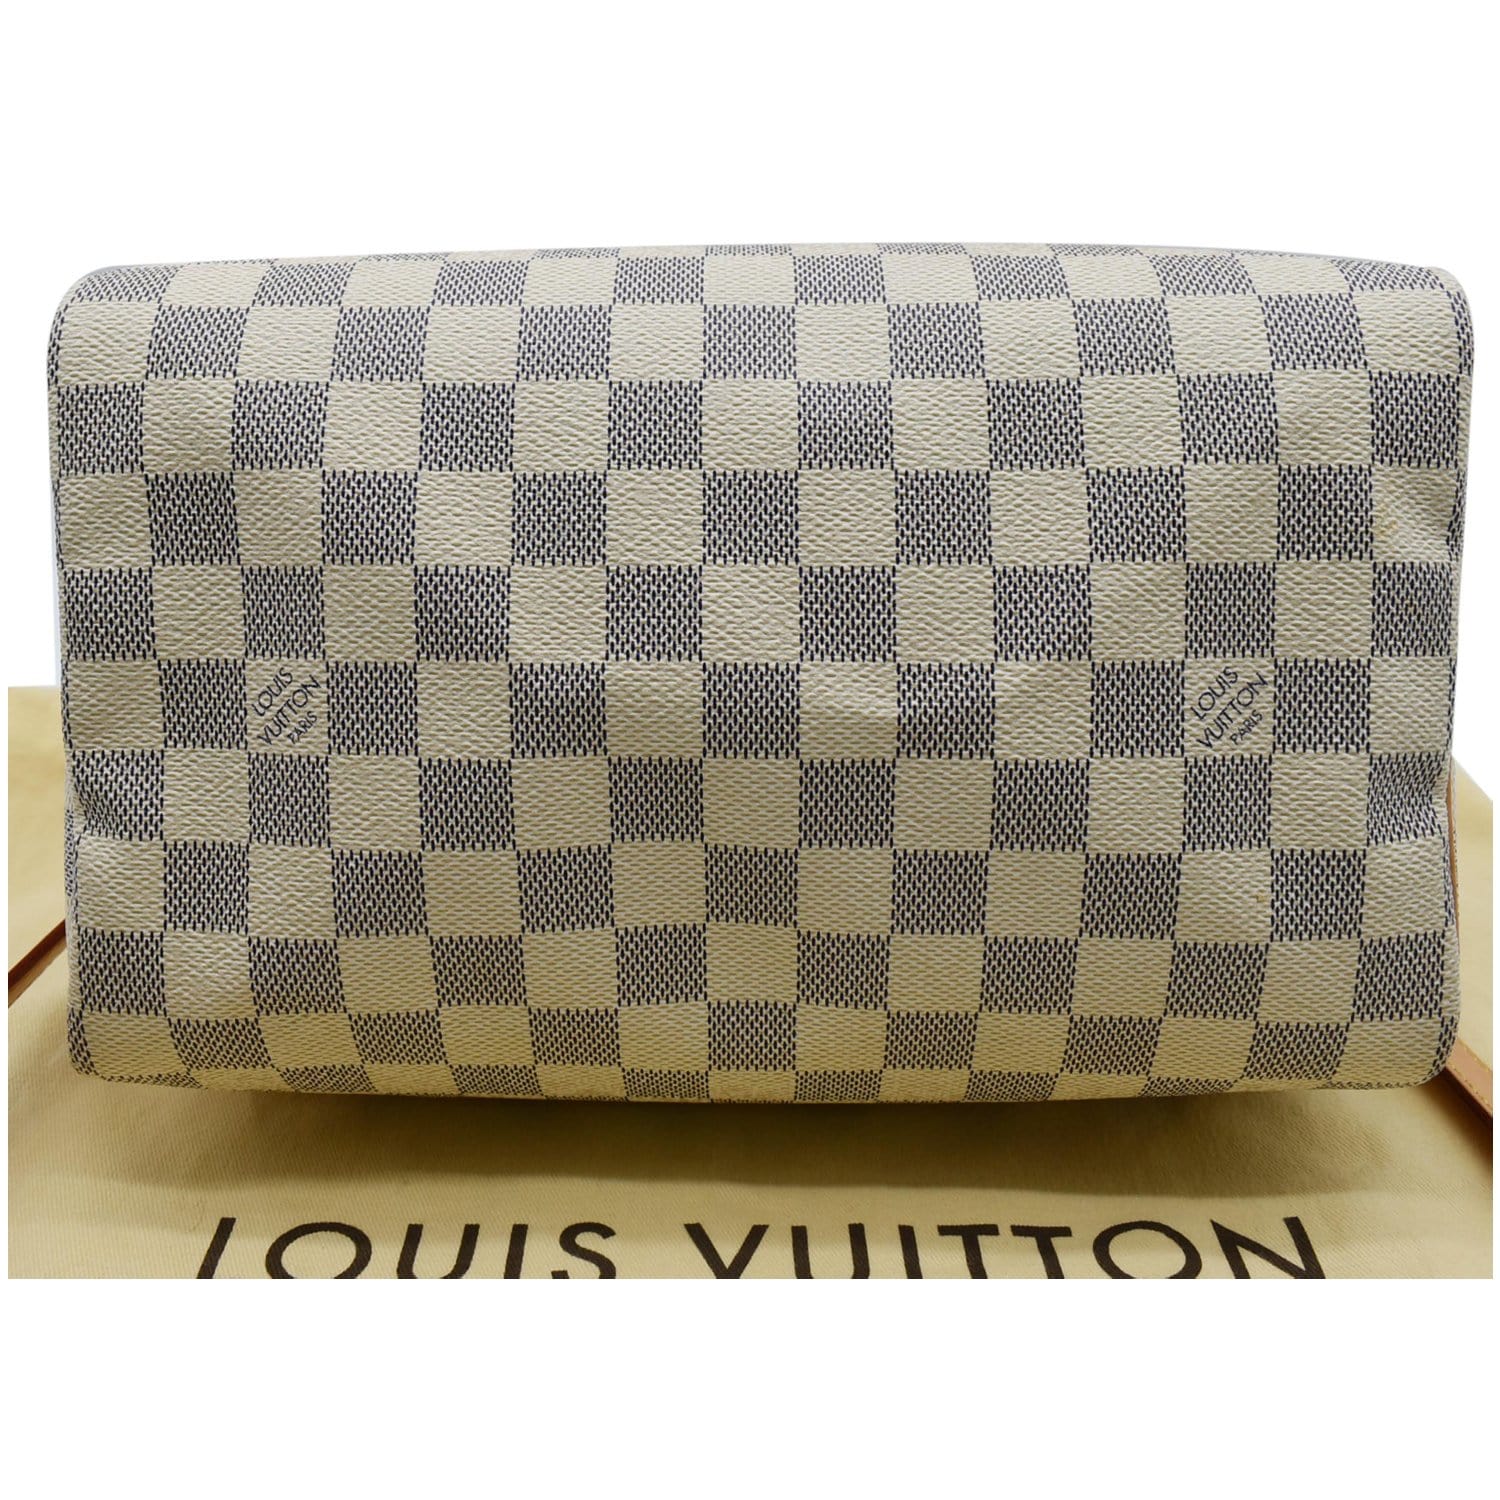 👜 LOUIS VUITTON 👜 HIGH QUALITY HAND BAG WITH BRANDED DUSTBAG *PRICE :  1250/-*